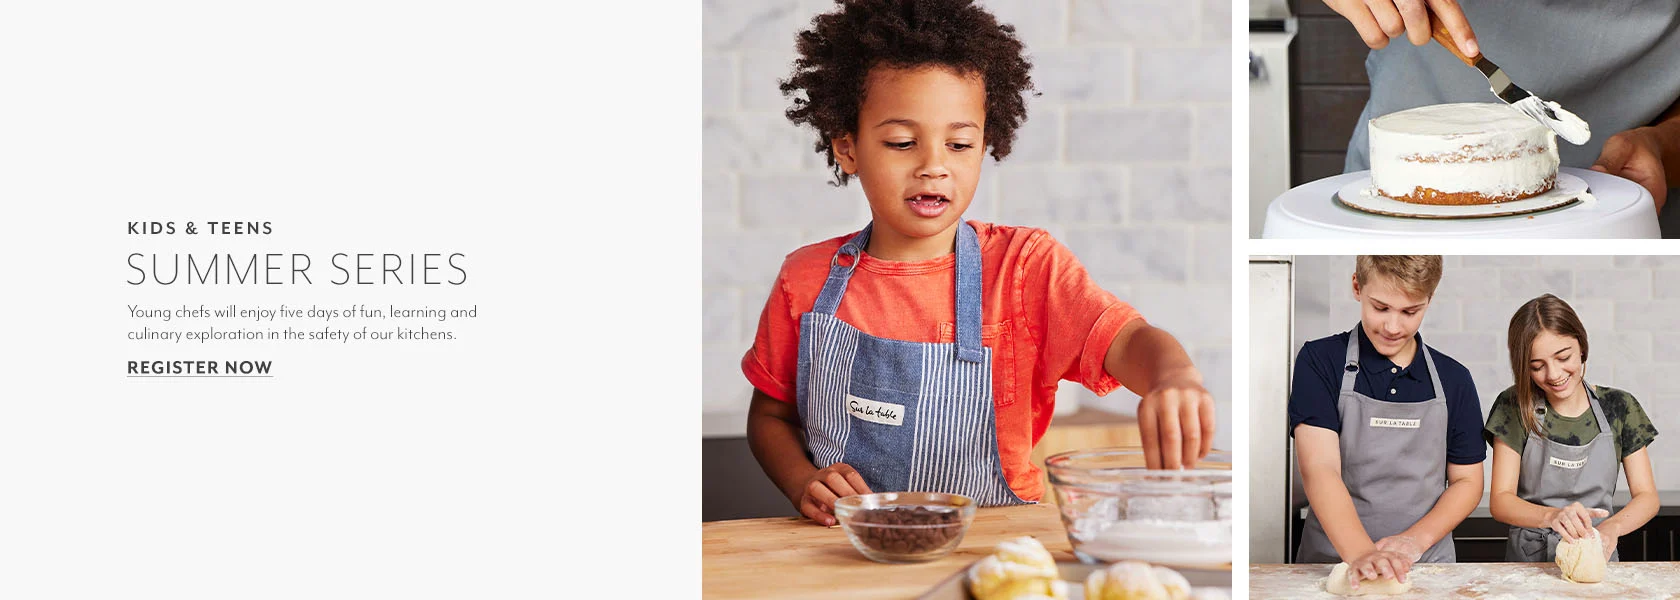 Kids and teens summer series. Young chefs will enjoy five days of fun, learning and culinary exploration in the safety of our kitchens. Register now.